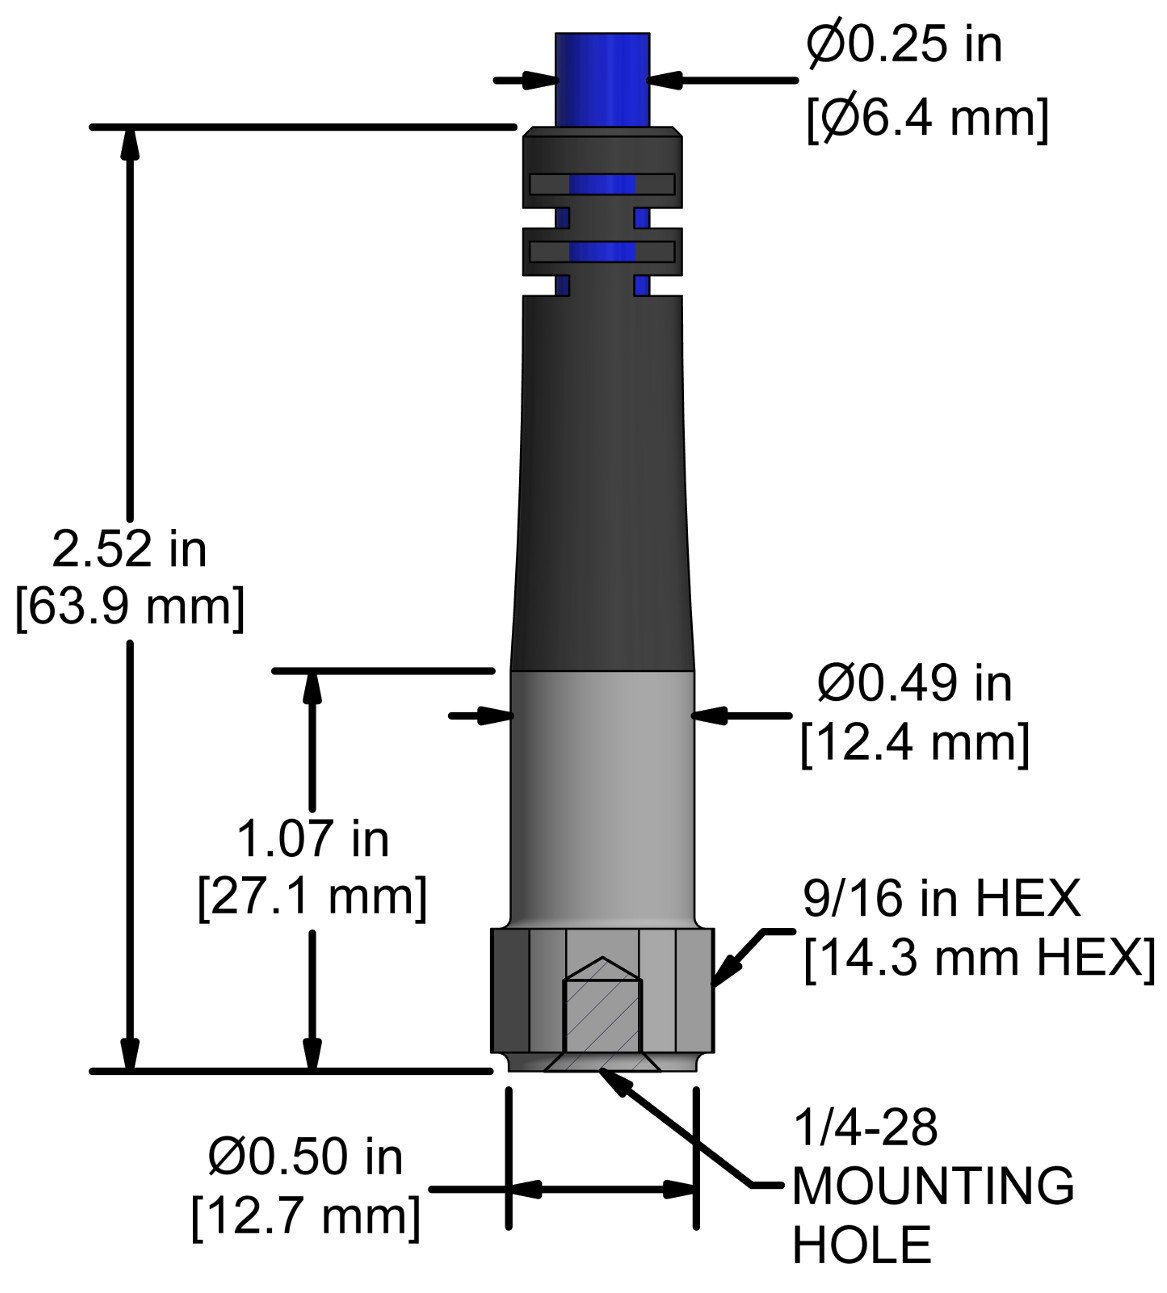 A drawing showing the dimensions and pin configuration of a CTC AC940 industrial accelerometer.